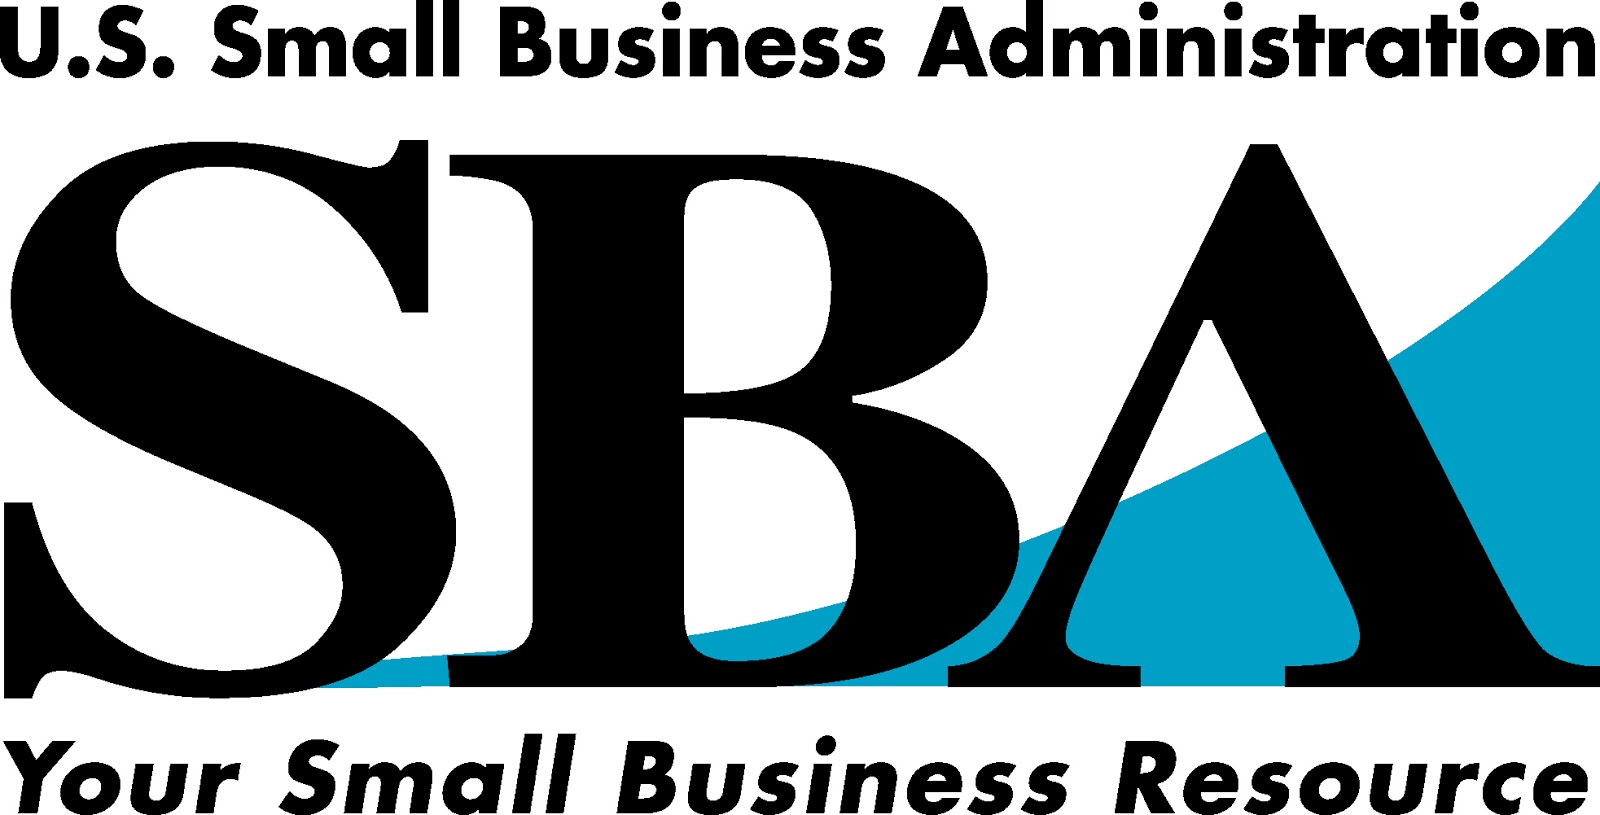 Small Business Administration awards downtown Springfield business owners